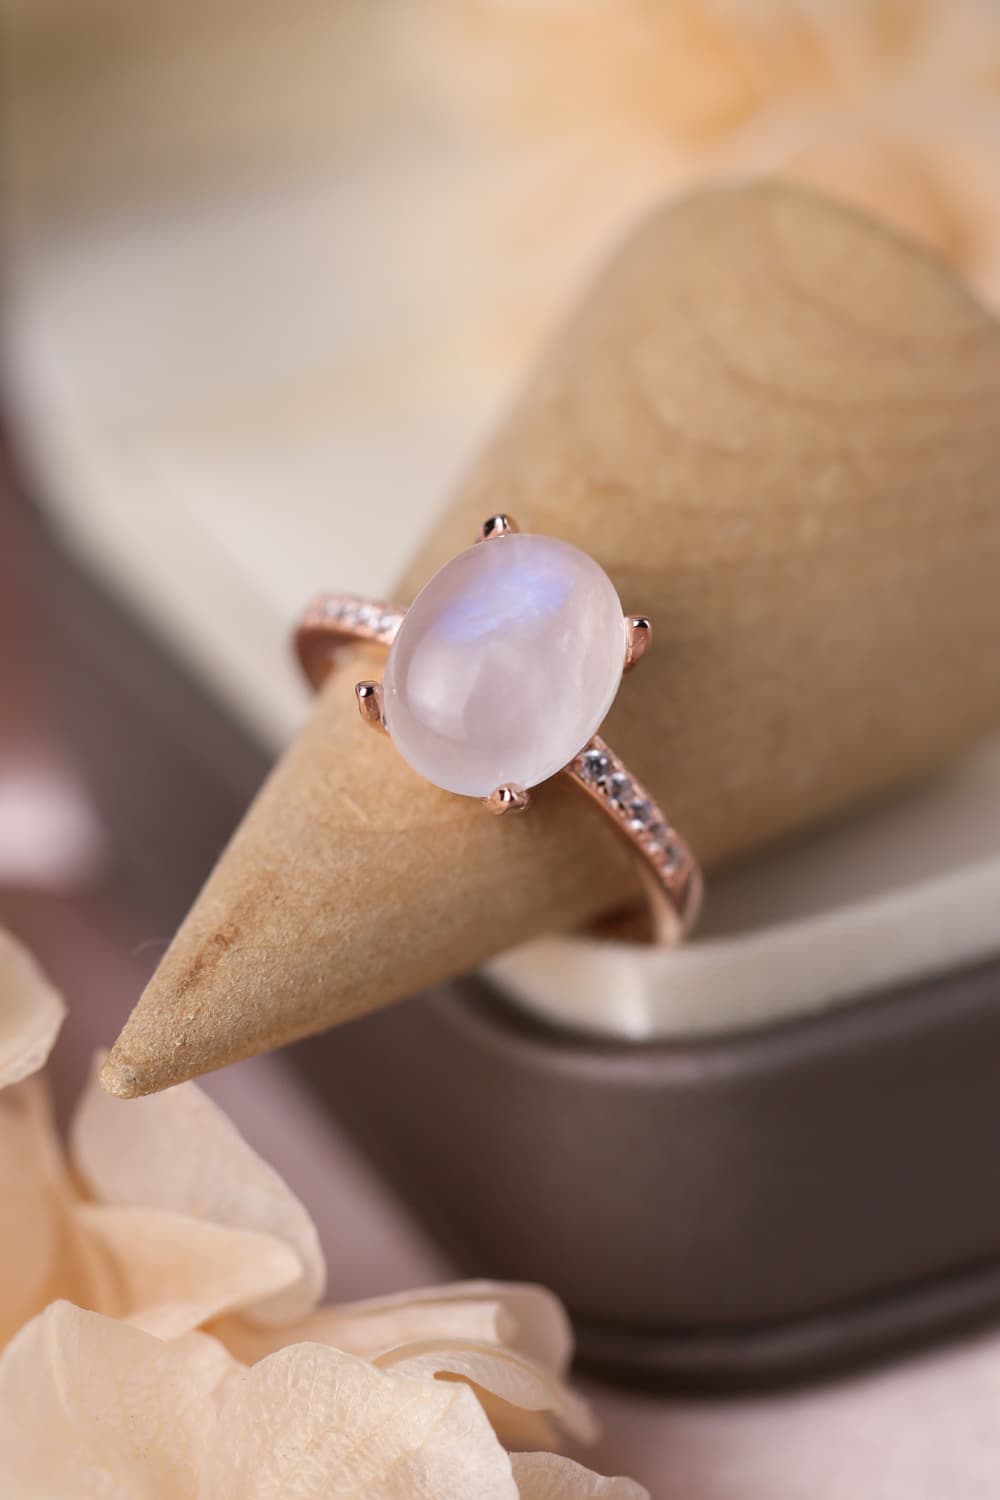 High Quality Natural Moonstone 925 Sterling Silver Side Stone Ring BLUE ZONE PLANET